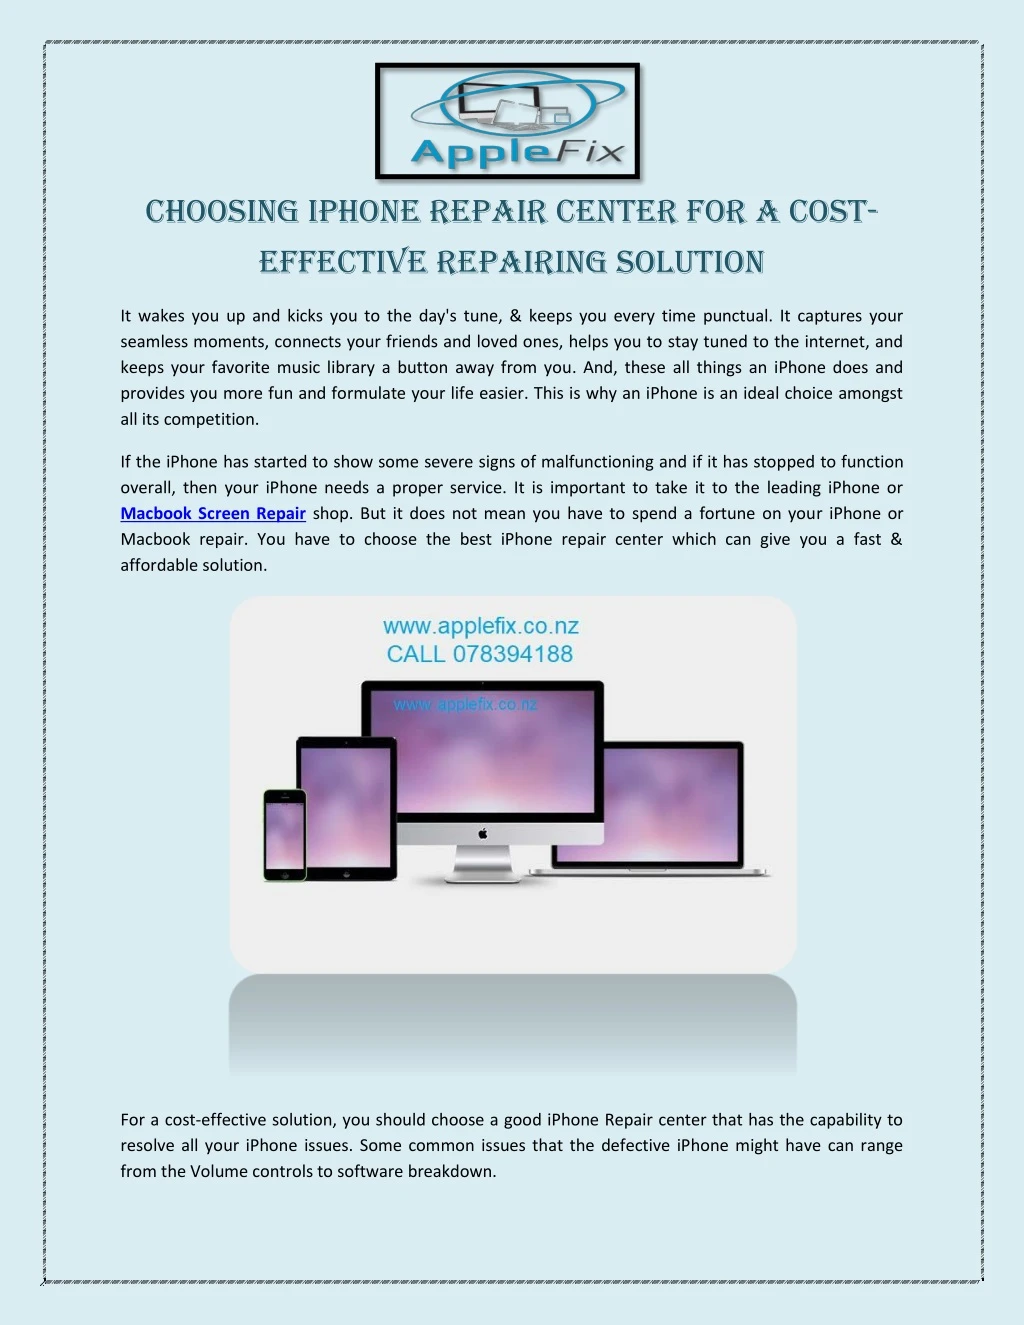 choosing iphone repair center for a cost